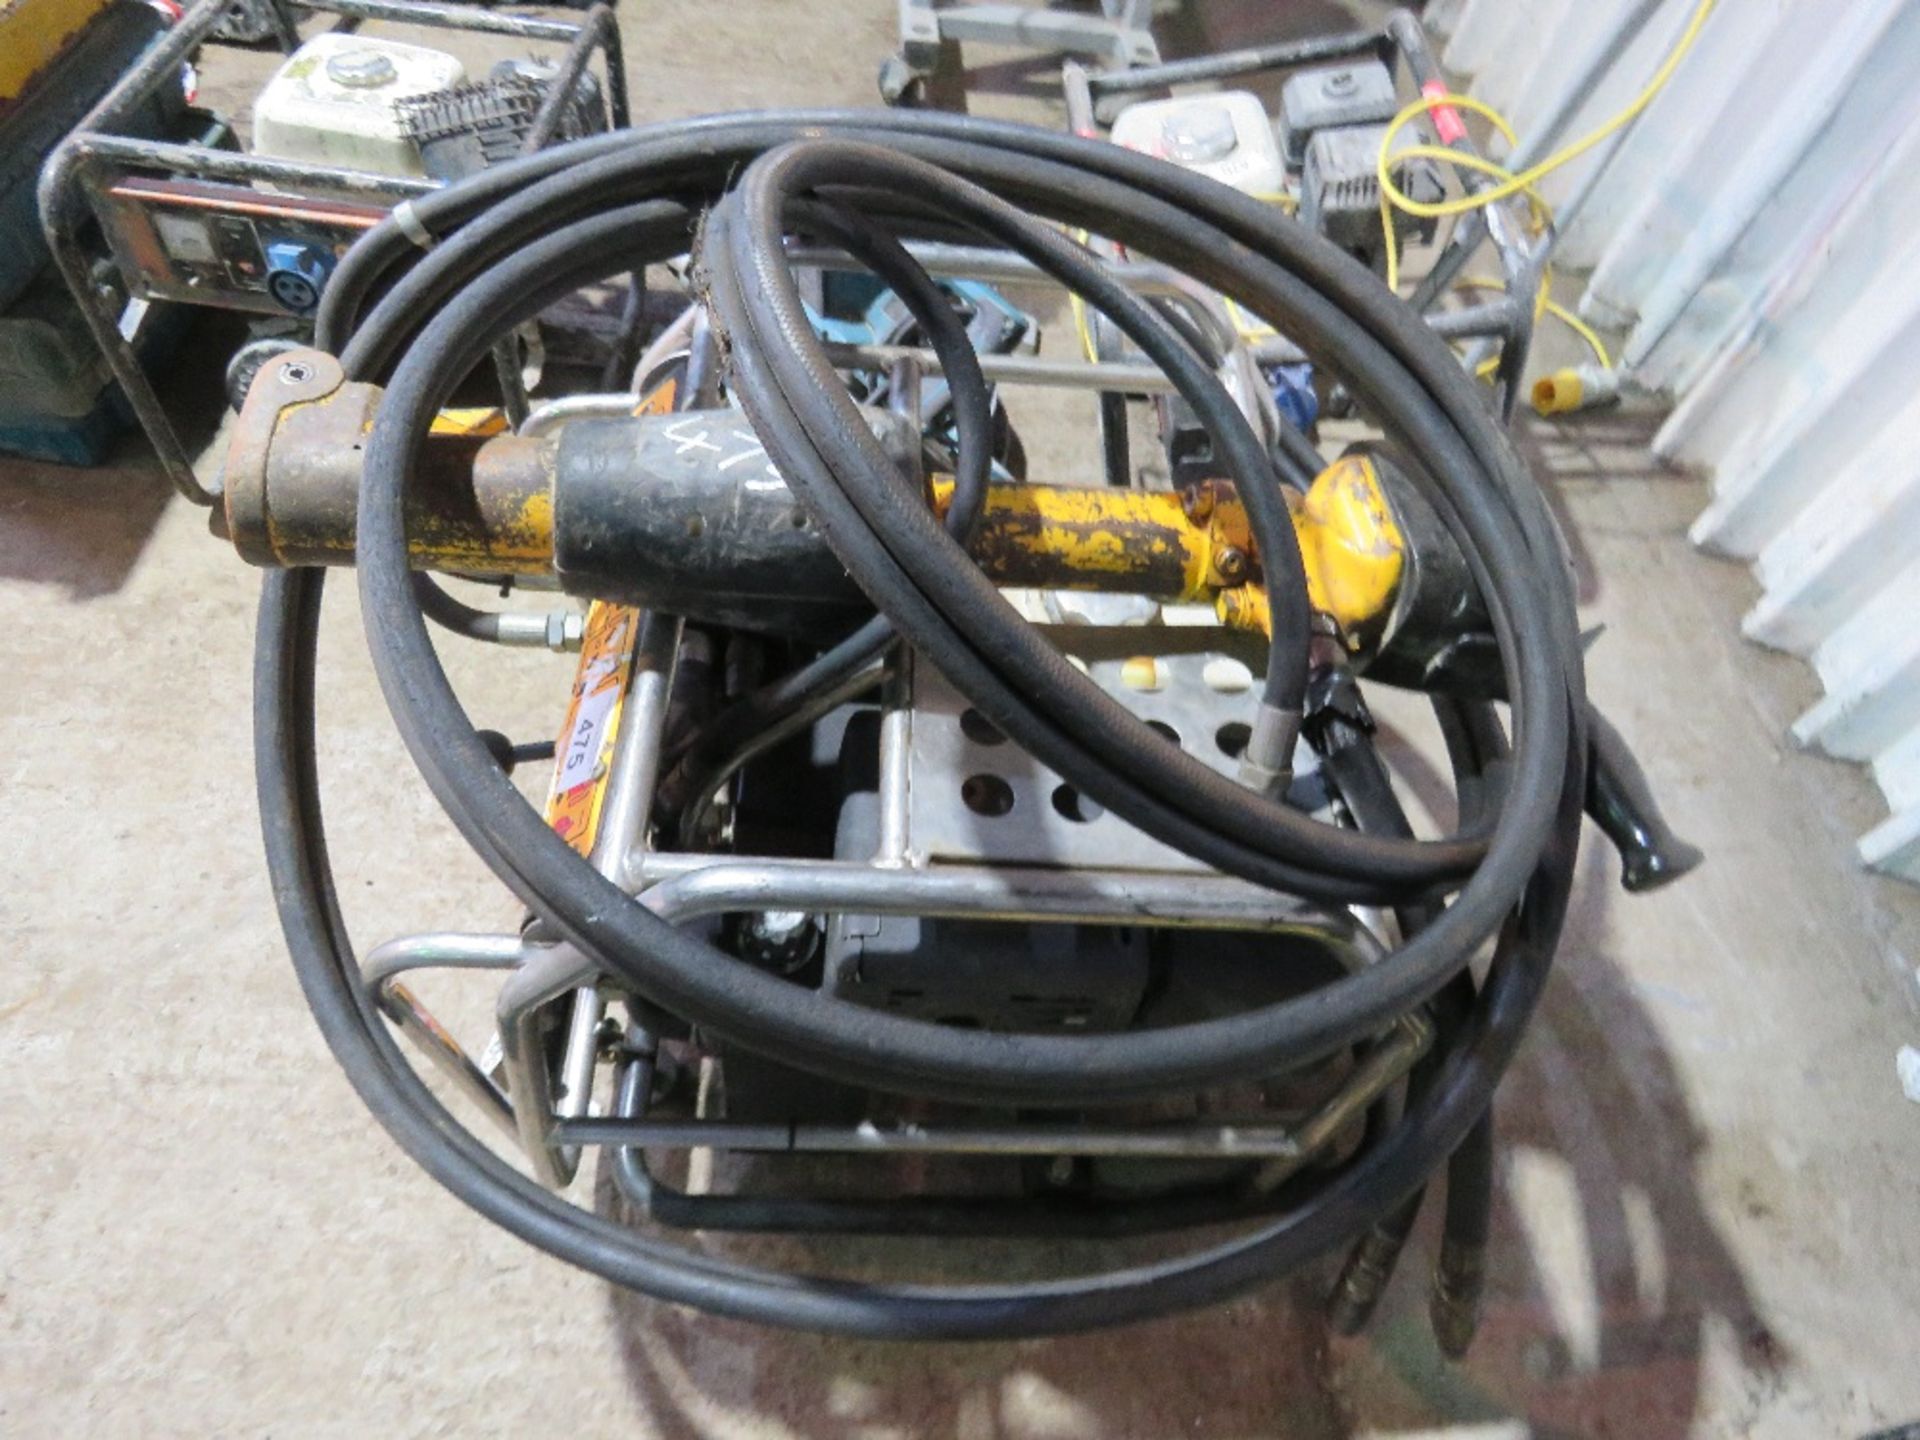 JCB HYDRAULIC BREAKER PACK WITH ANTI VIBRATION GUN AND HOSE. - Image 3 of 4